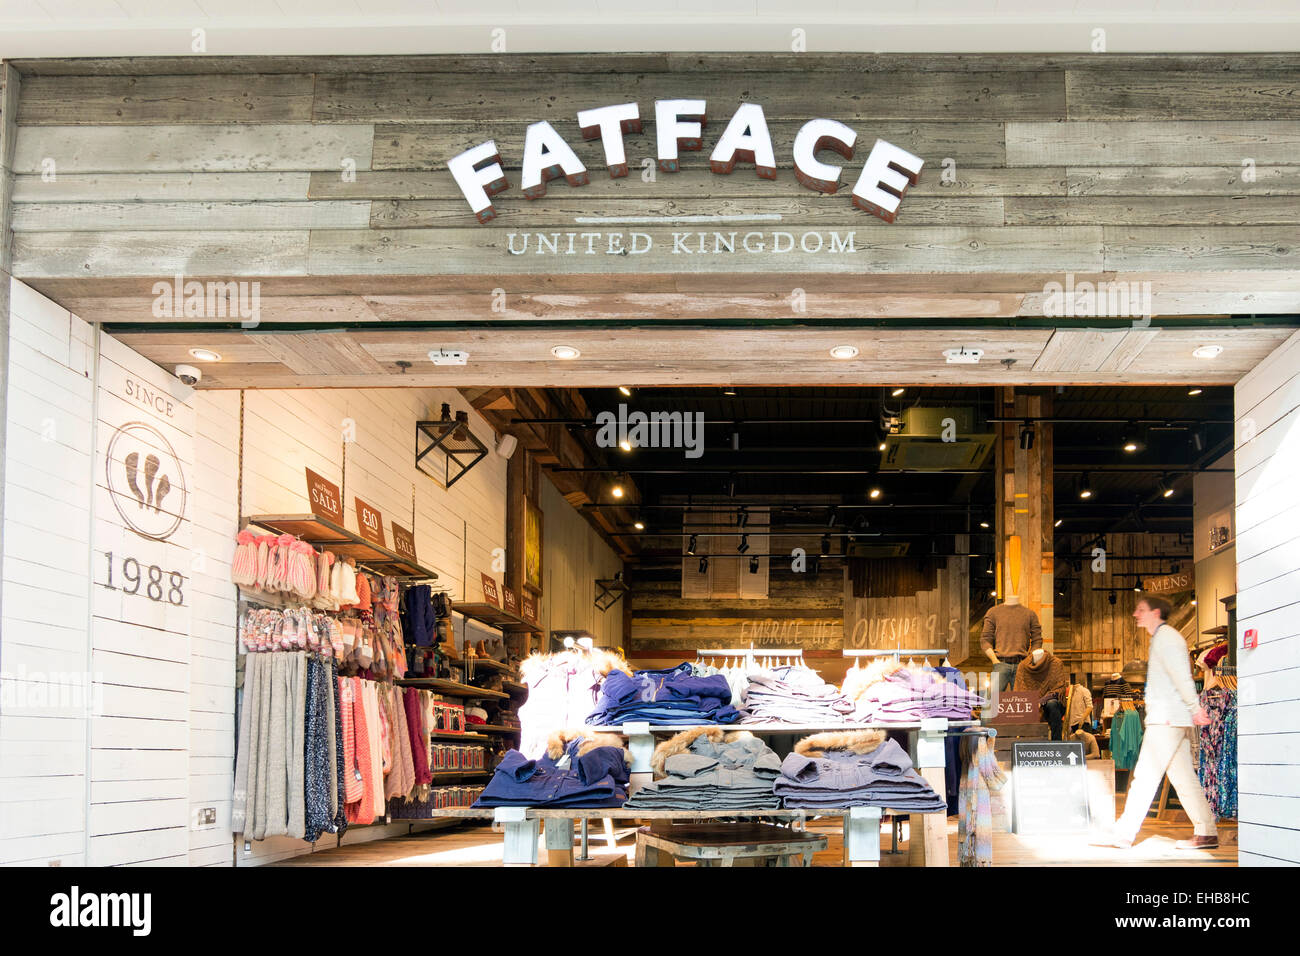 fatface outlet stores